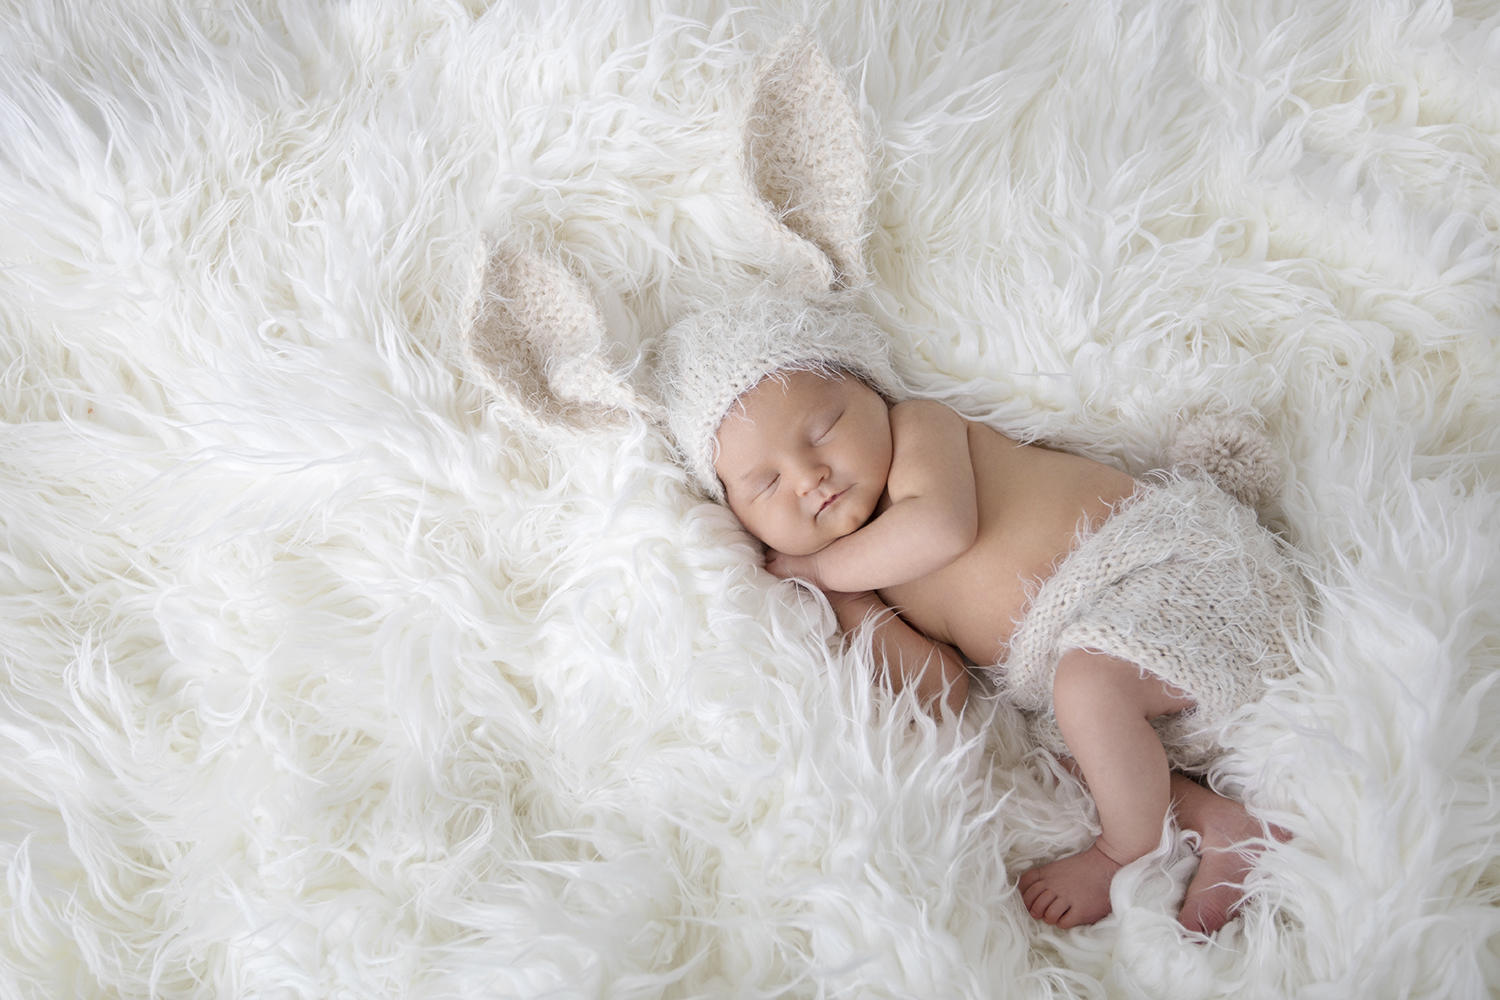 A photograph showcasing the delicate features of a newborn baby, with bunny ears and closed eyes, radiating innocence and serenity.